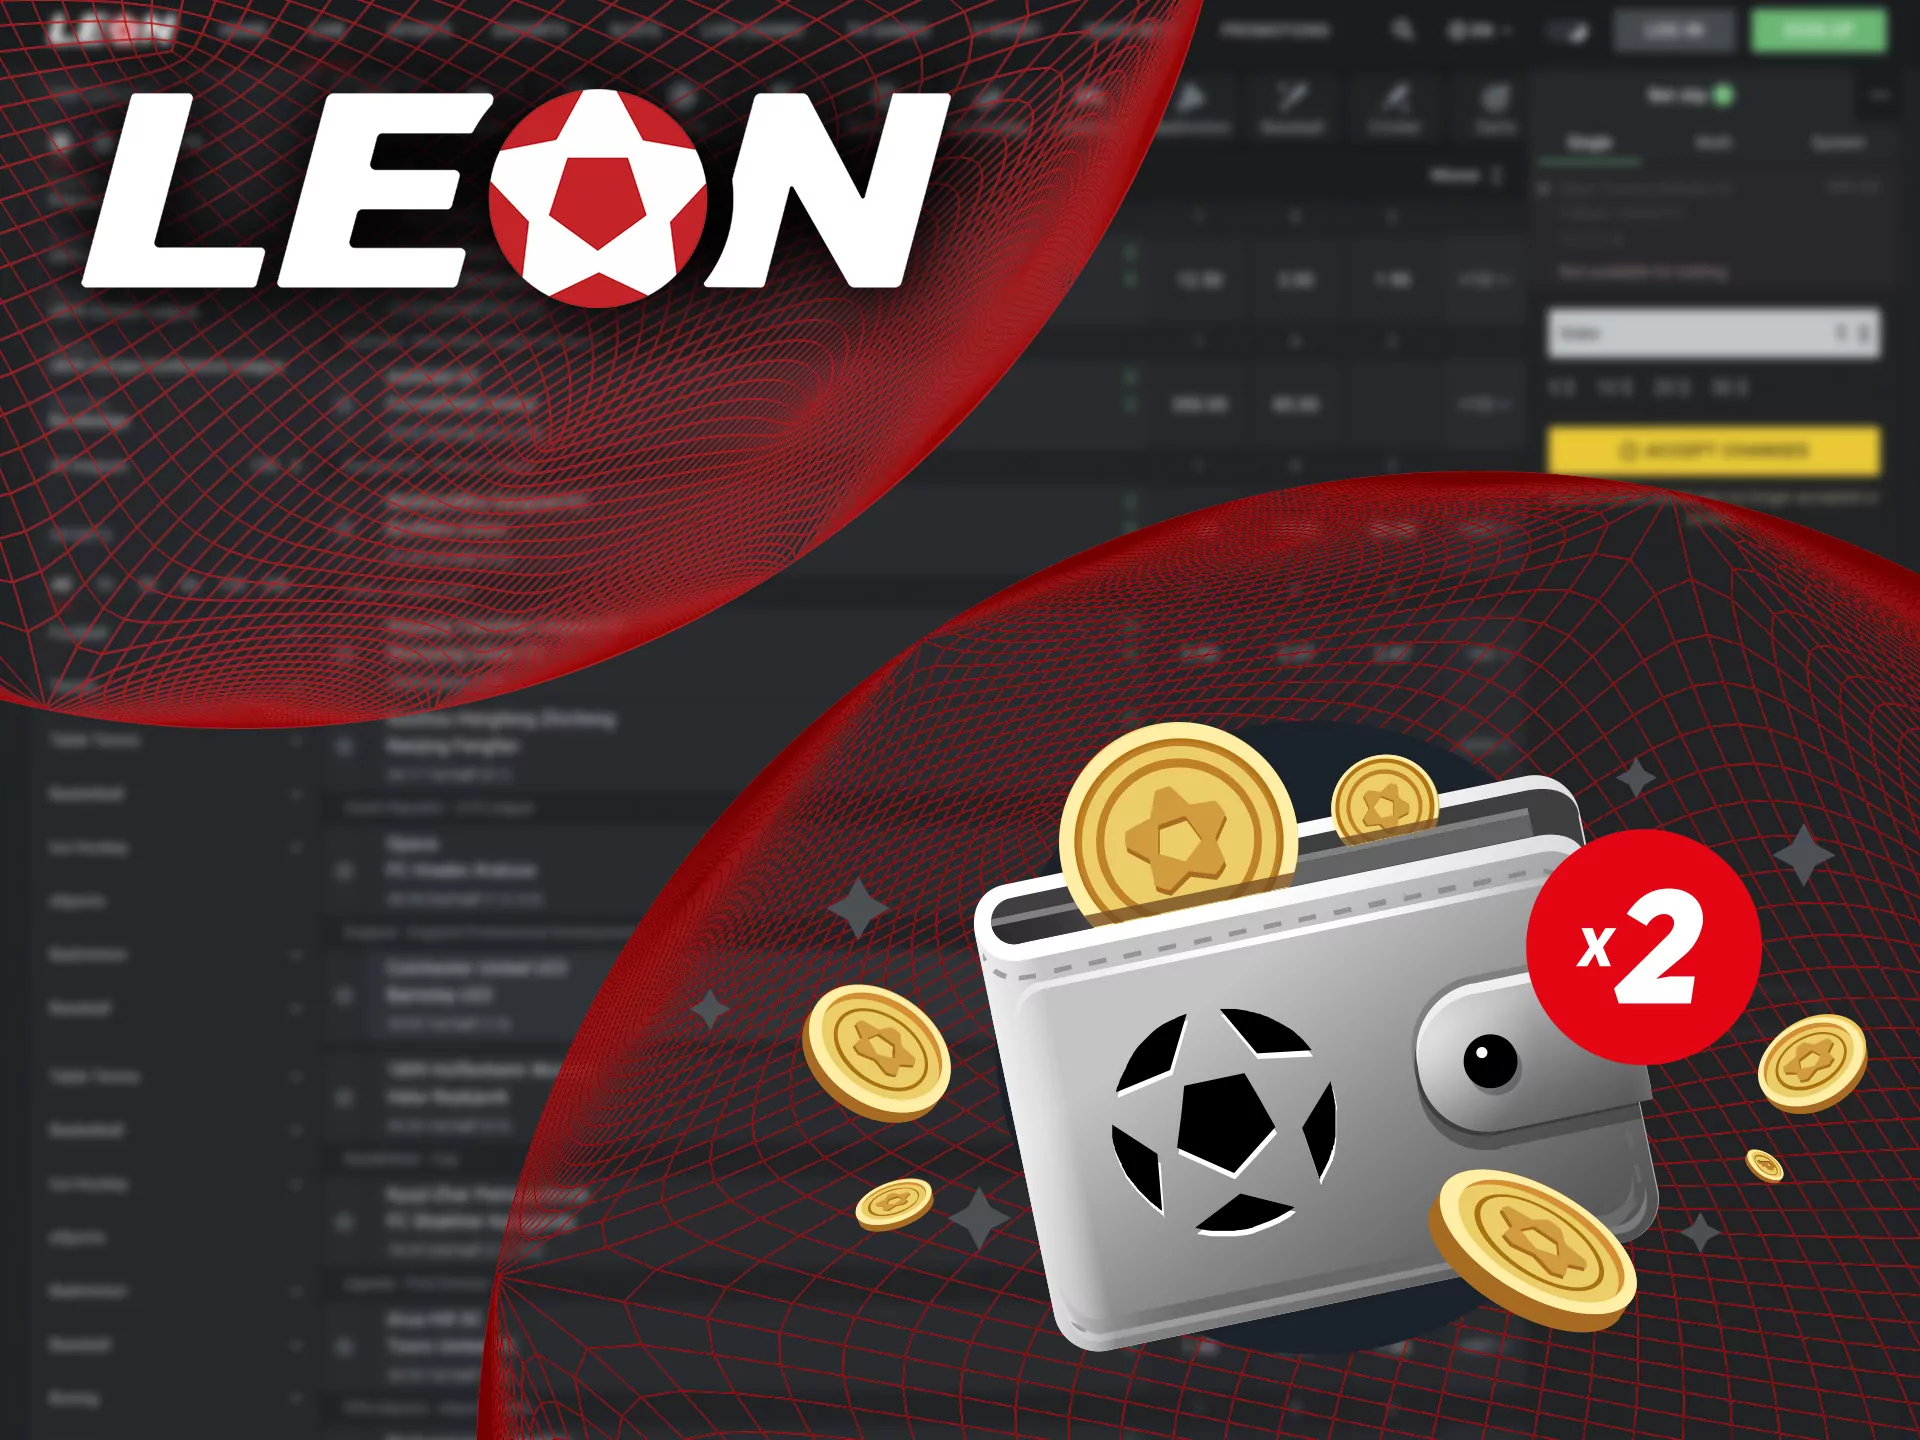 Payment operations in Leon are quick and safe.